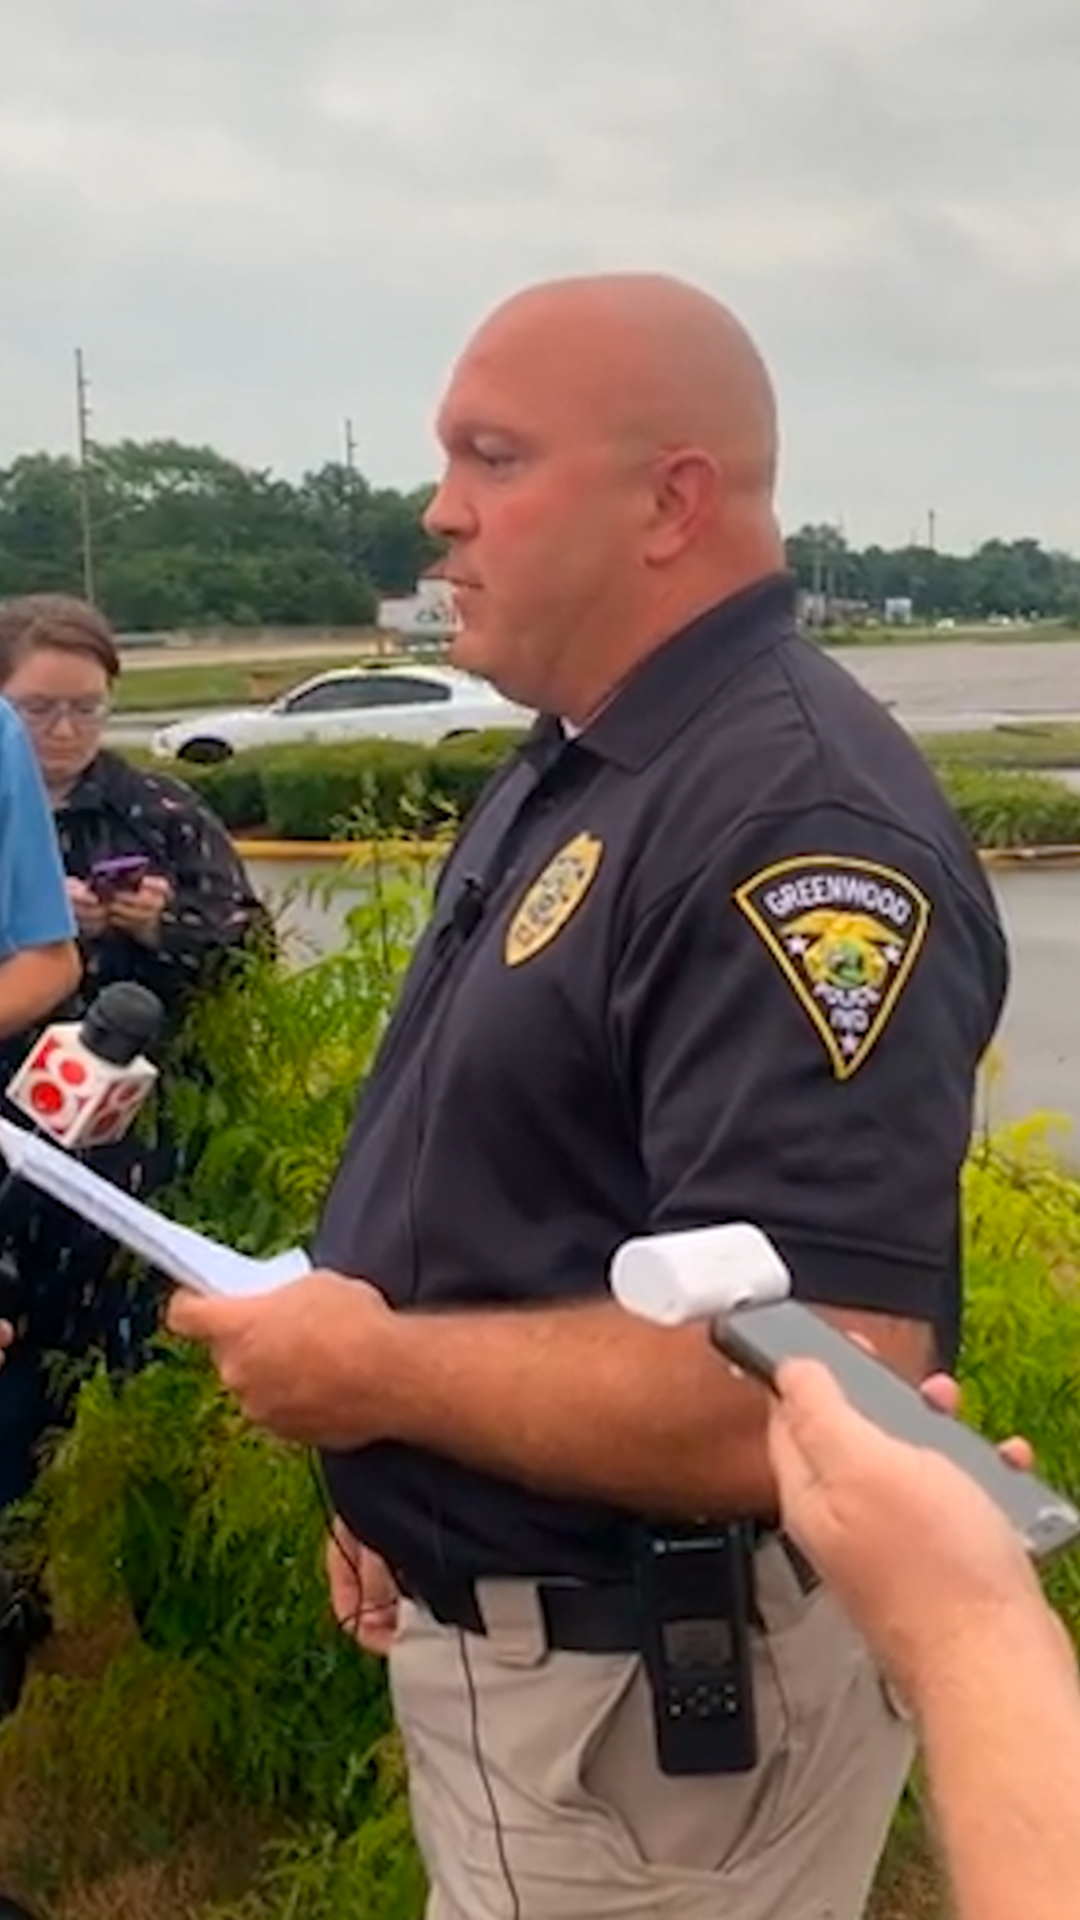 Indiana mall shooting leaves 4 dead including gunman, police say